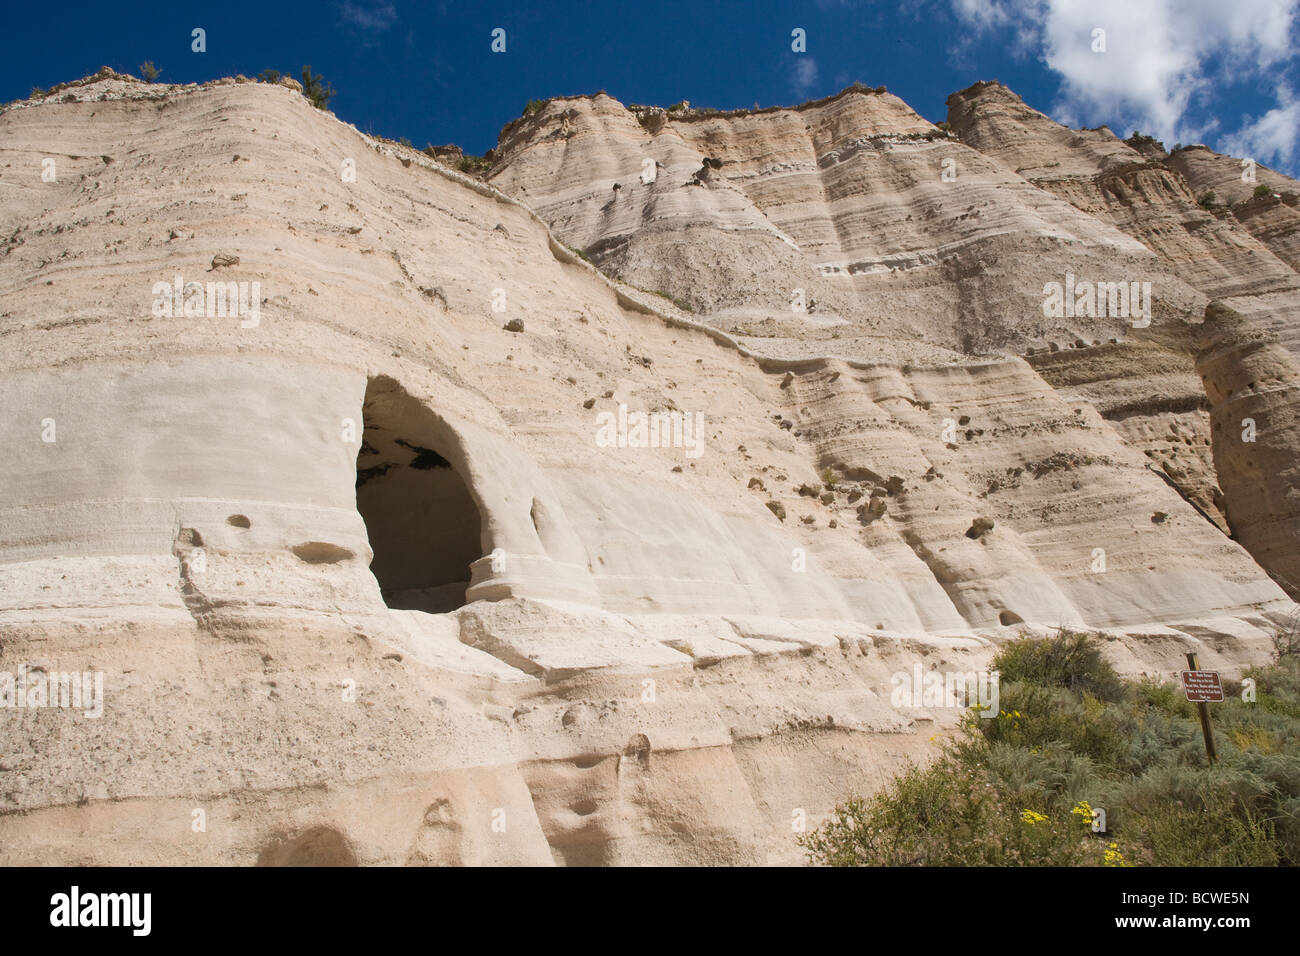 Low angle view of rock formations, Kasha-Katuwe Tent Rocks, New Mexico, USA Banque D'Images